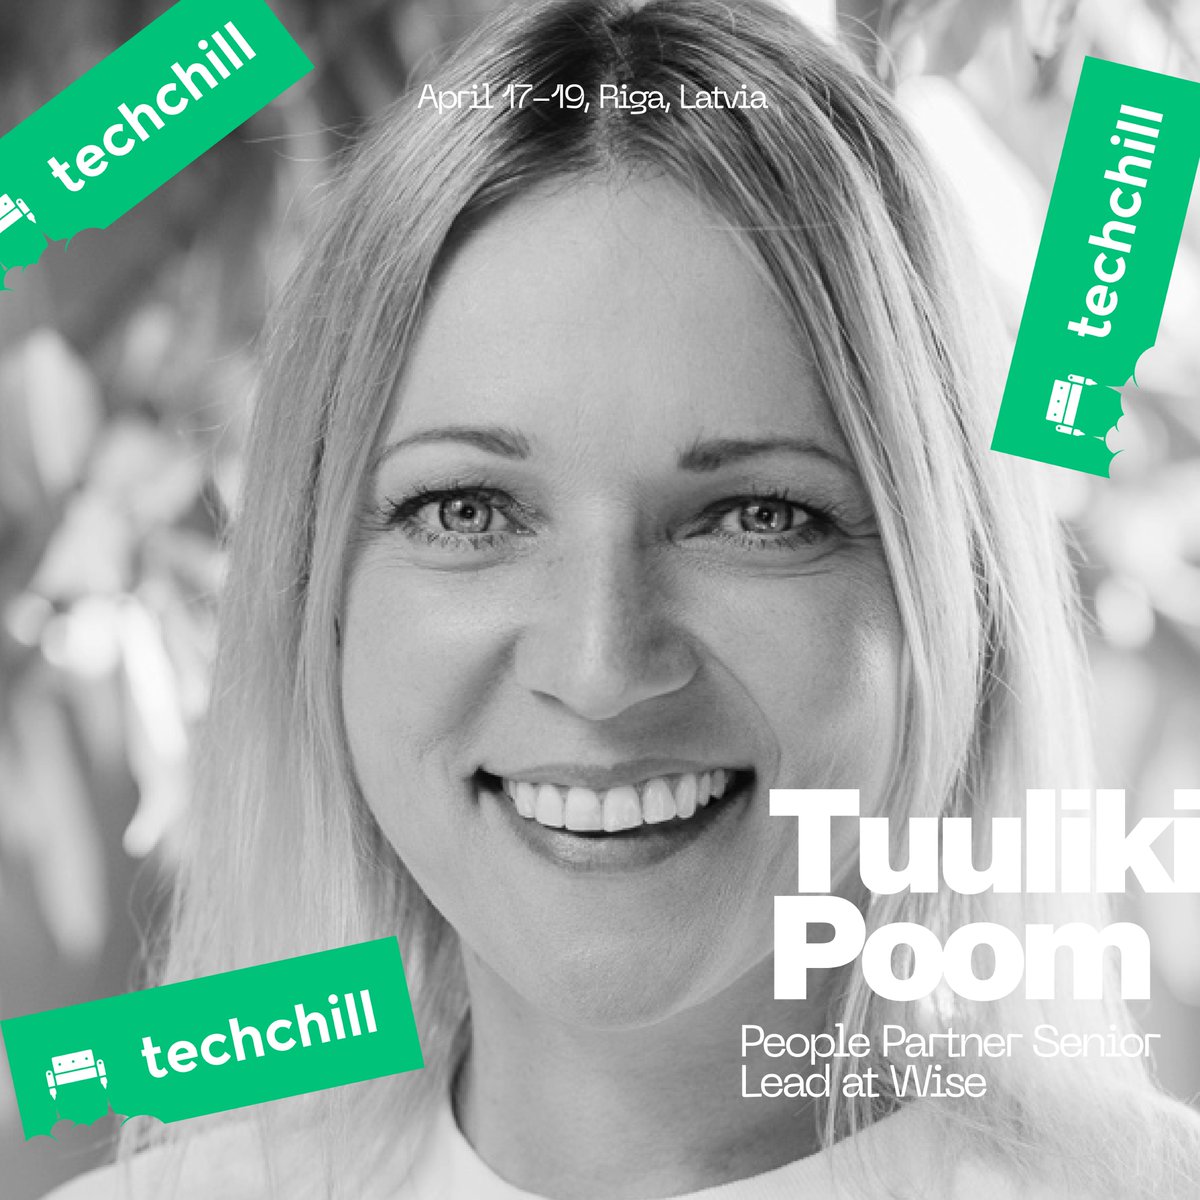 Introducing Tuuliki Poom, People Partner Senior Lead at Wise! With vast experience in HR management across diverse industries, Tuuliki plays a pivotal role in shaping Wise's global People strategy and fostering an innovative, inclusive culture. techchill.co/get-pass